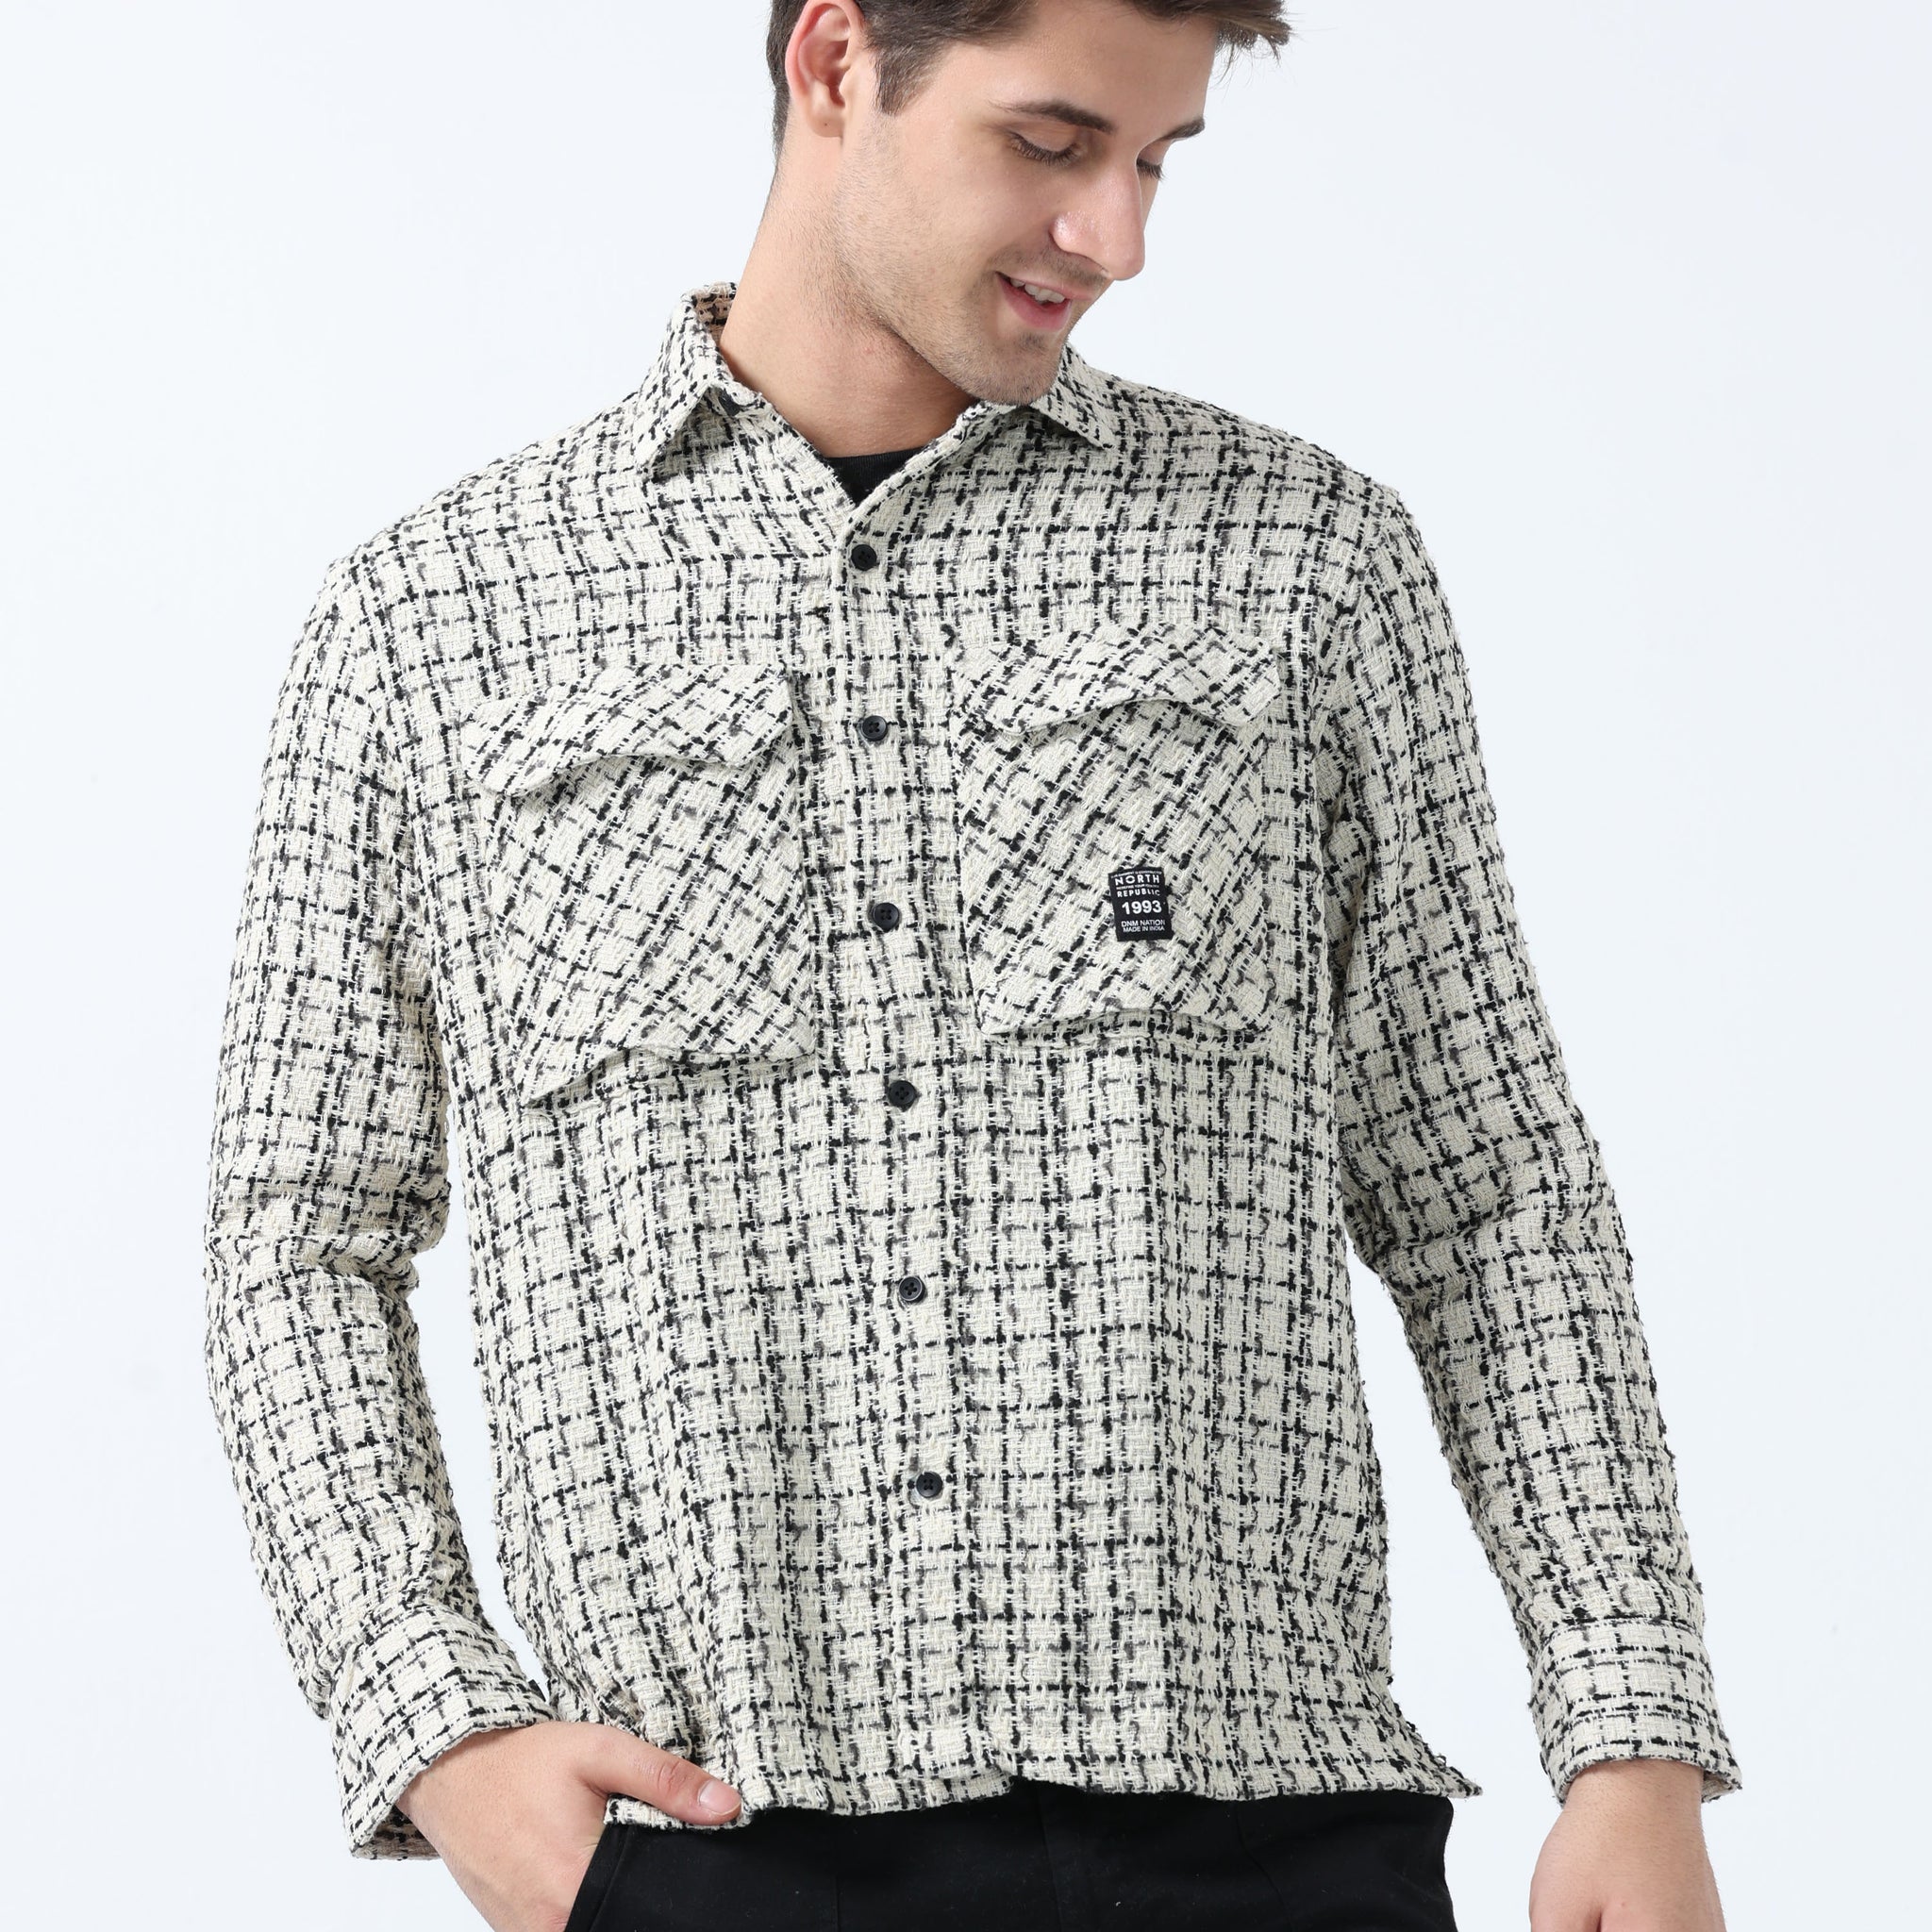 Cream Imported Fabric Double Pocket Men's Checked Shirt